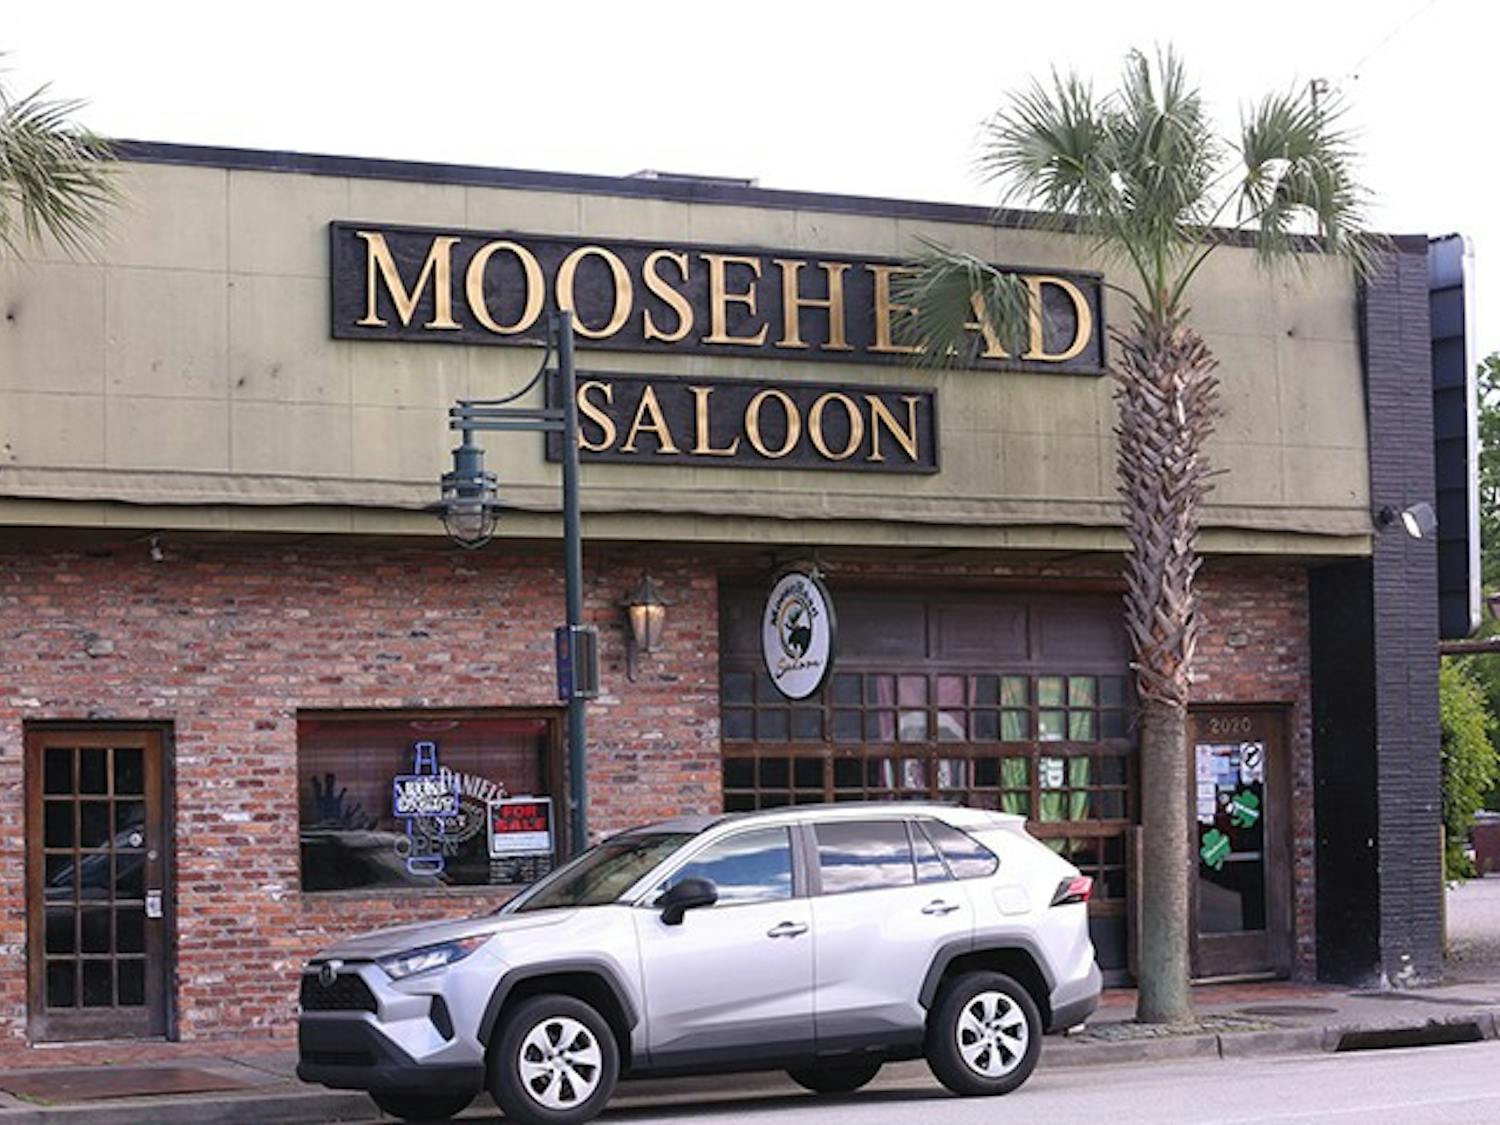 The Moosehead Saloon, a bar in Five Points, has recently gone up for sale after a series of bar closings.